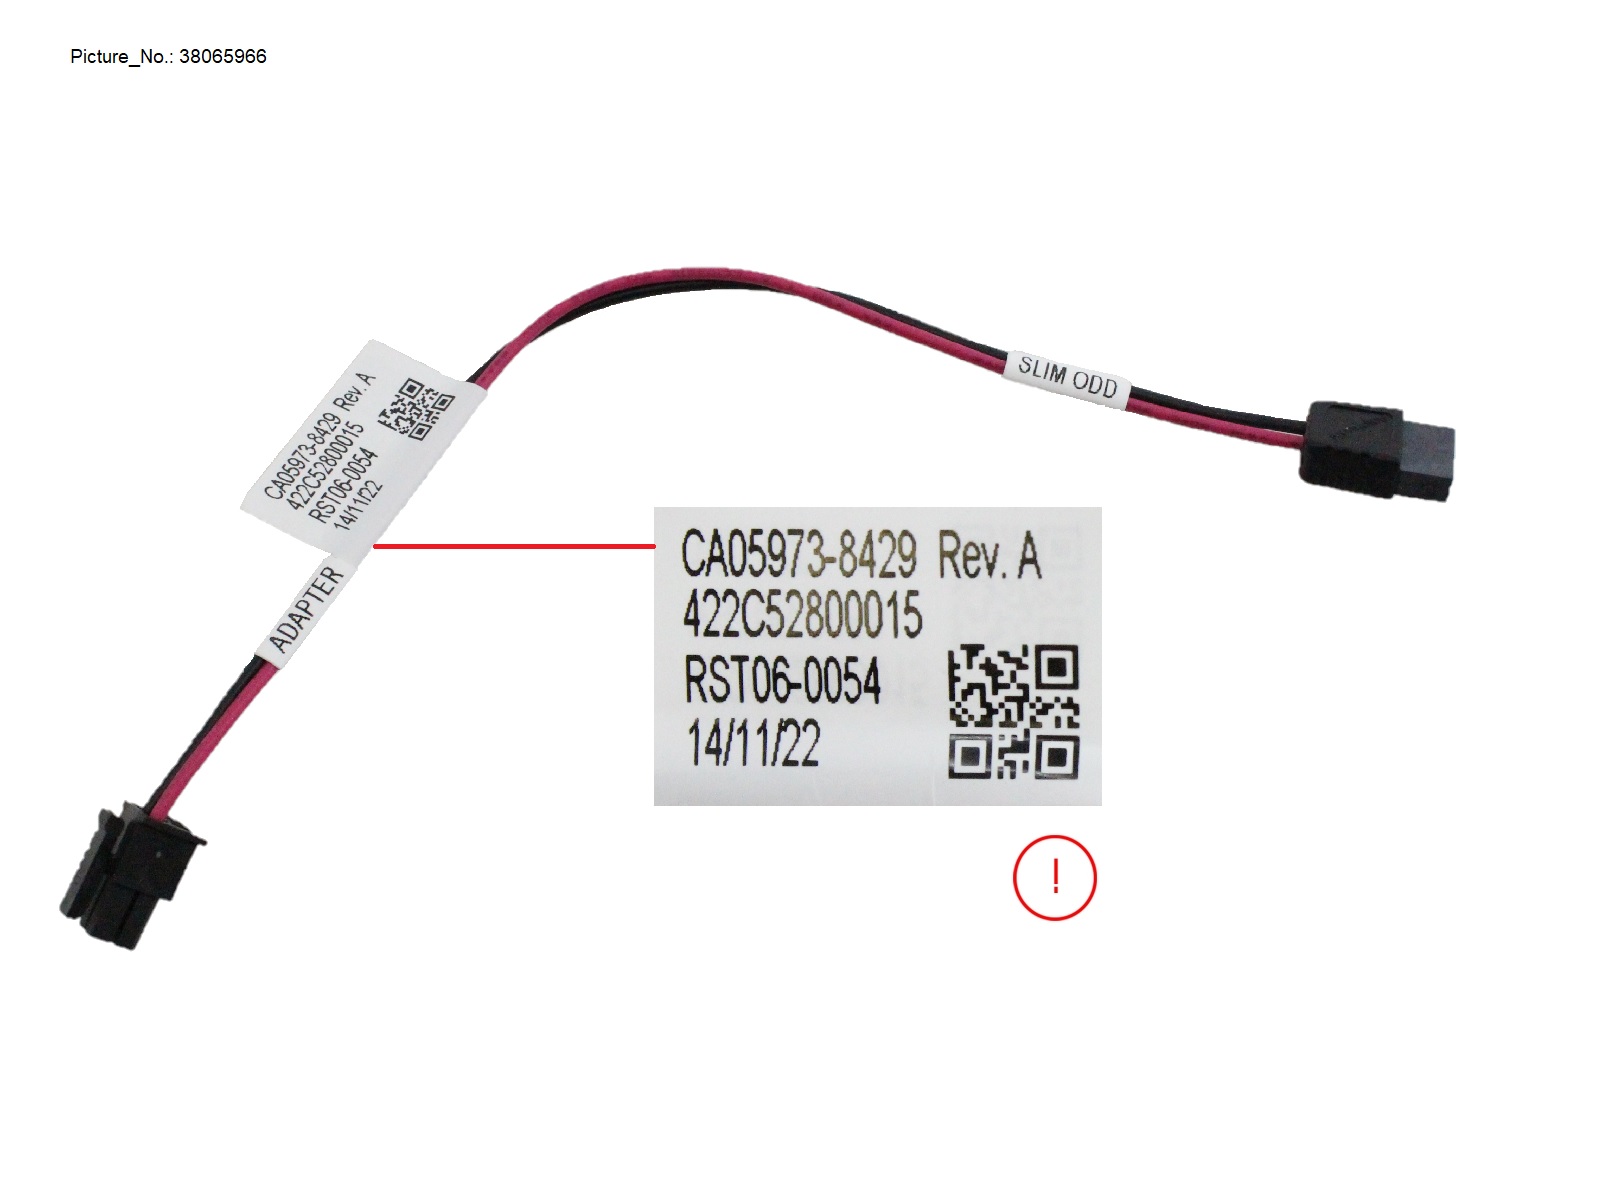 POWER CABLE FOR SLIM ODD